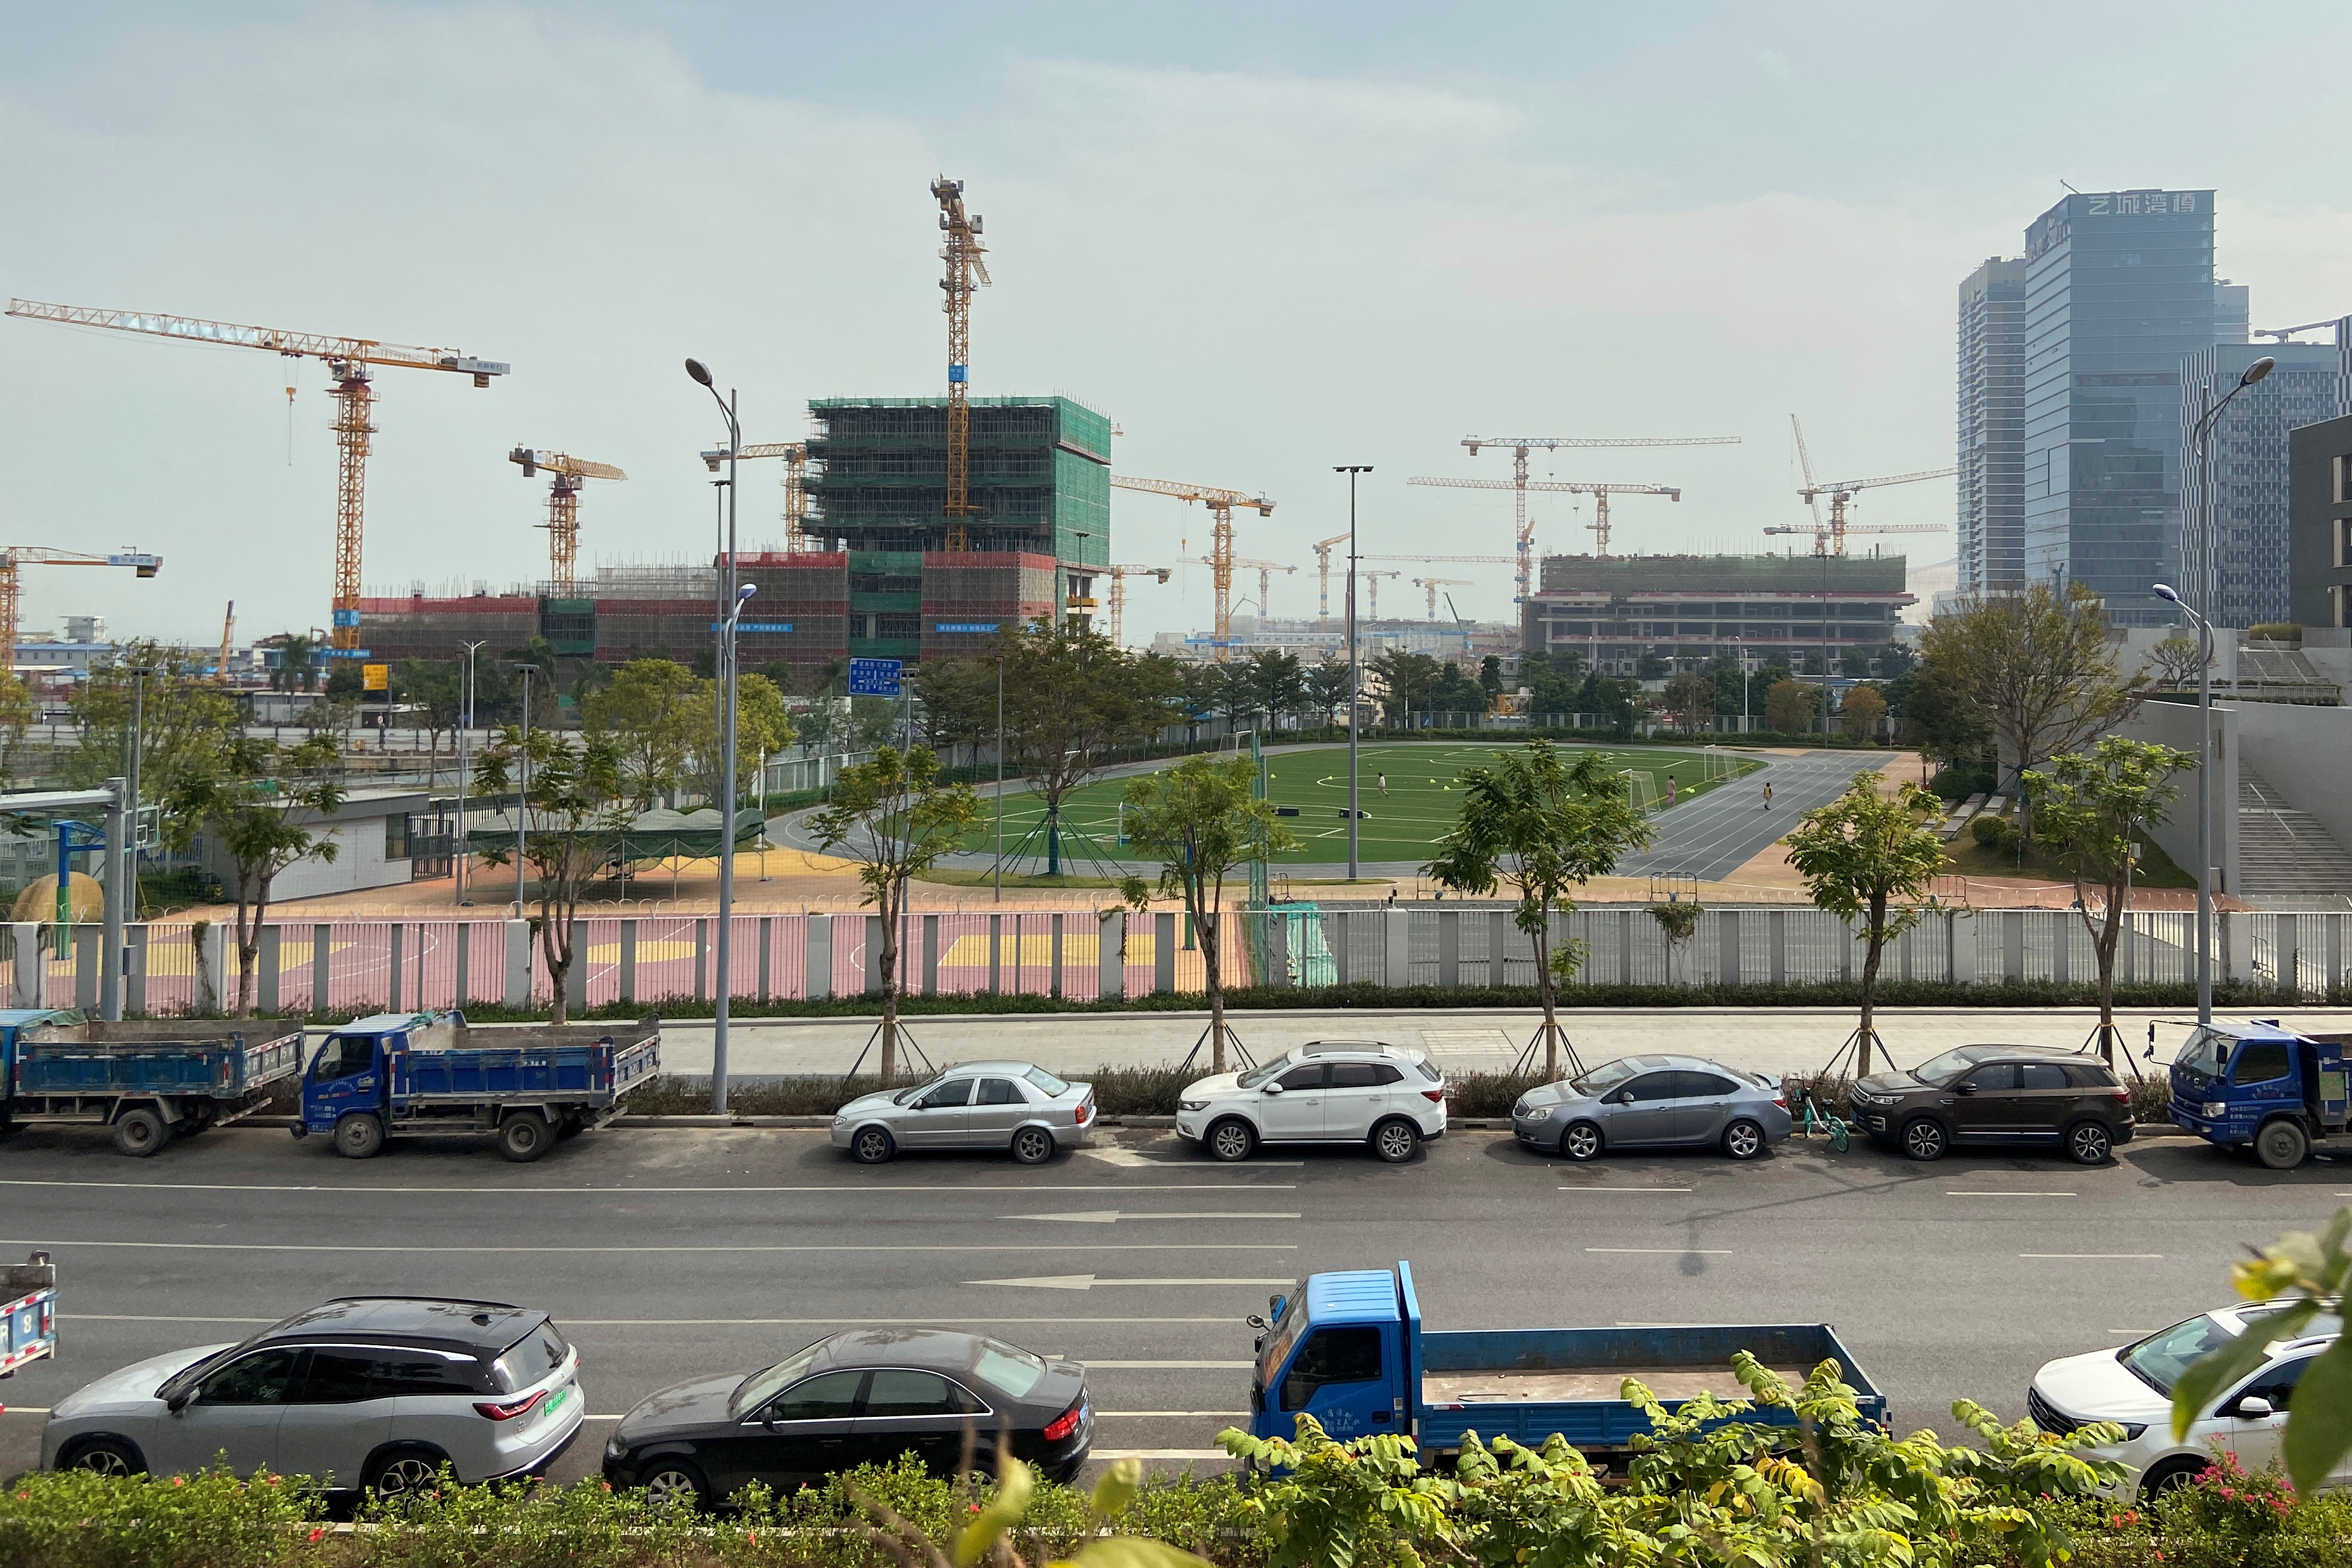 Real estate projects under construction are seen in the Shekou area of Shenzhen, Guangdong